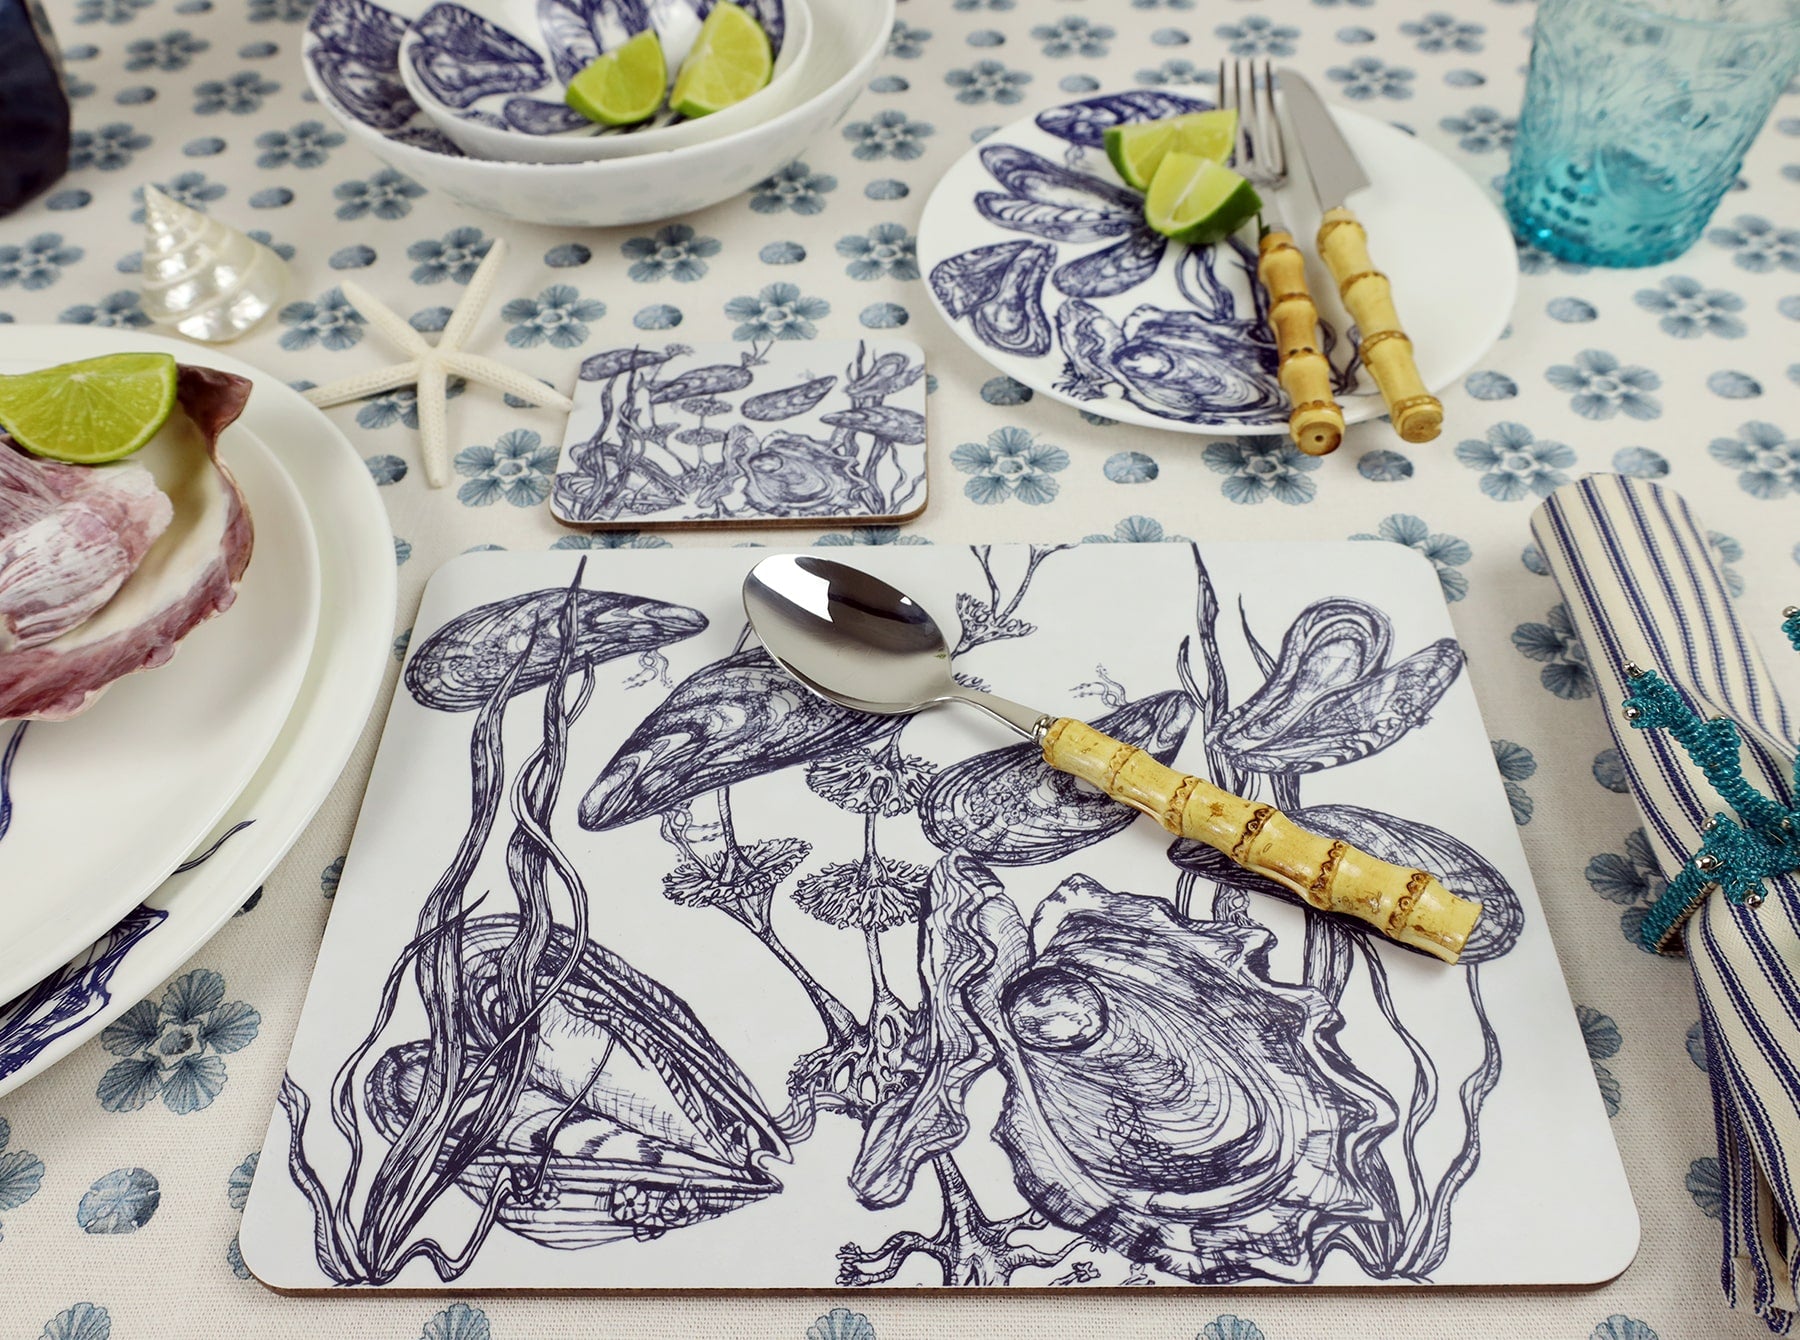 Mussel and Oyster Design in Navy on a white Coaster with a matching Placemat on a Seastar printed tablecloth,also on the table are other tableware and bamboo tableware.